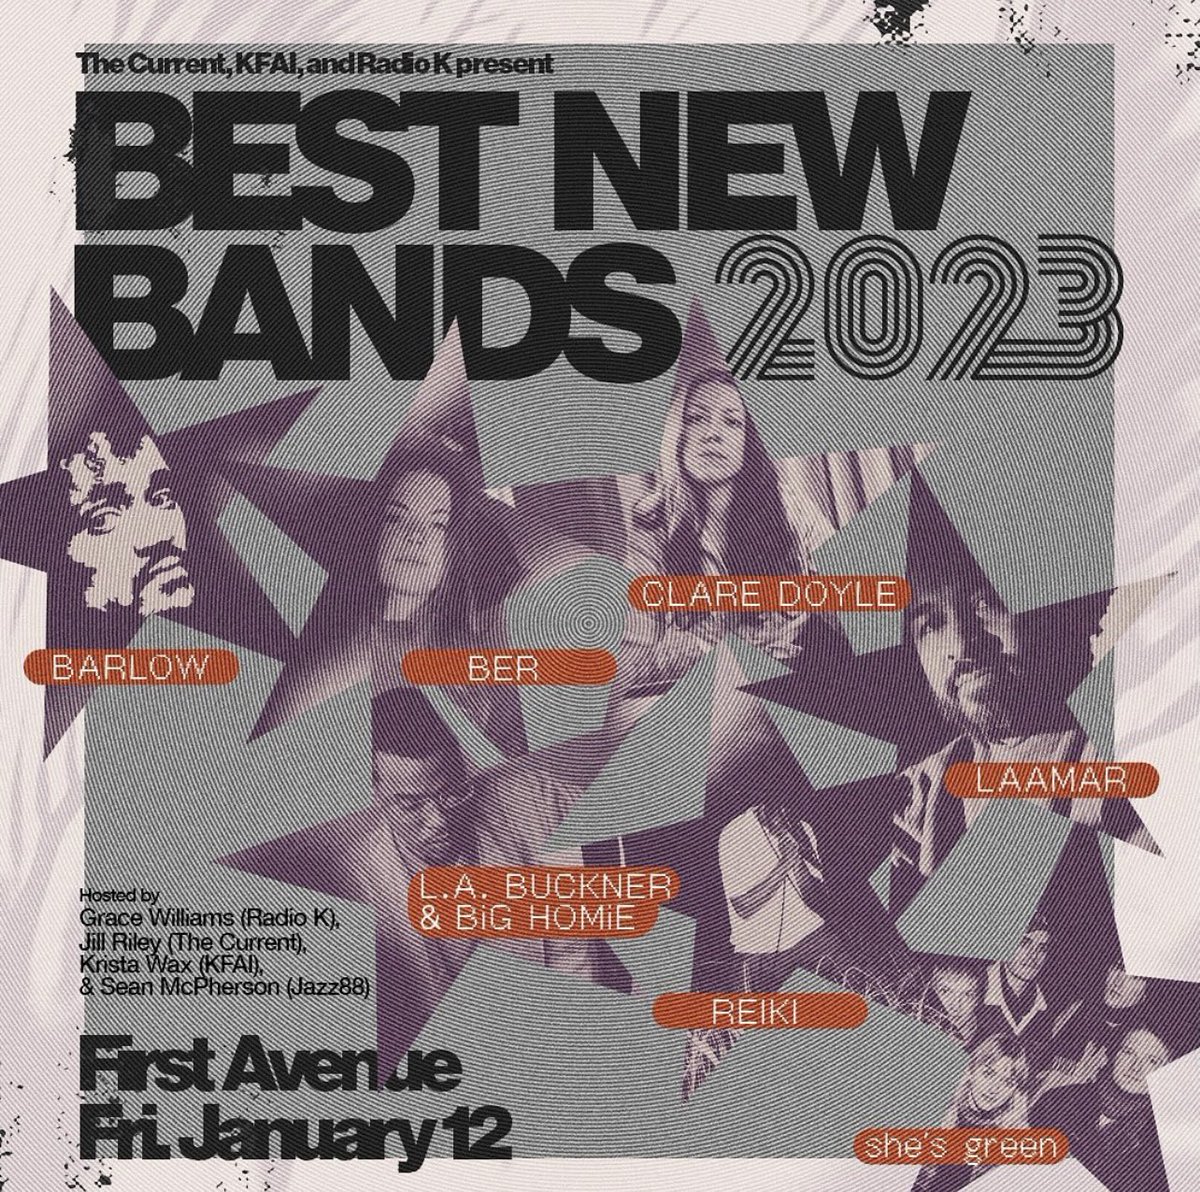 In case you missed it: @FirstAvenue announced their lineup for Best New Bands of 2023! Congratulations to all the great artists included. 👏👏👏 All will be performing at this great local showcase Jan 12 in the Mainroom. 🎵🤘